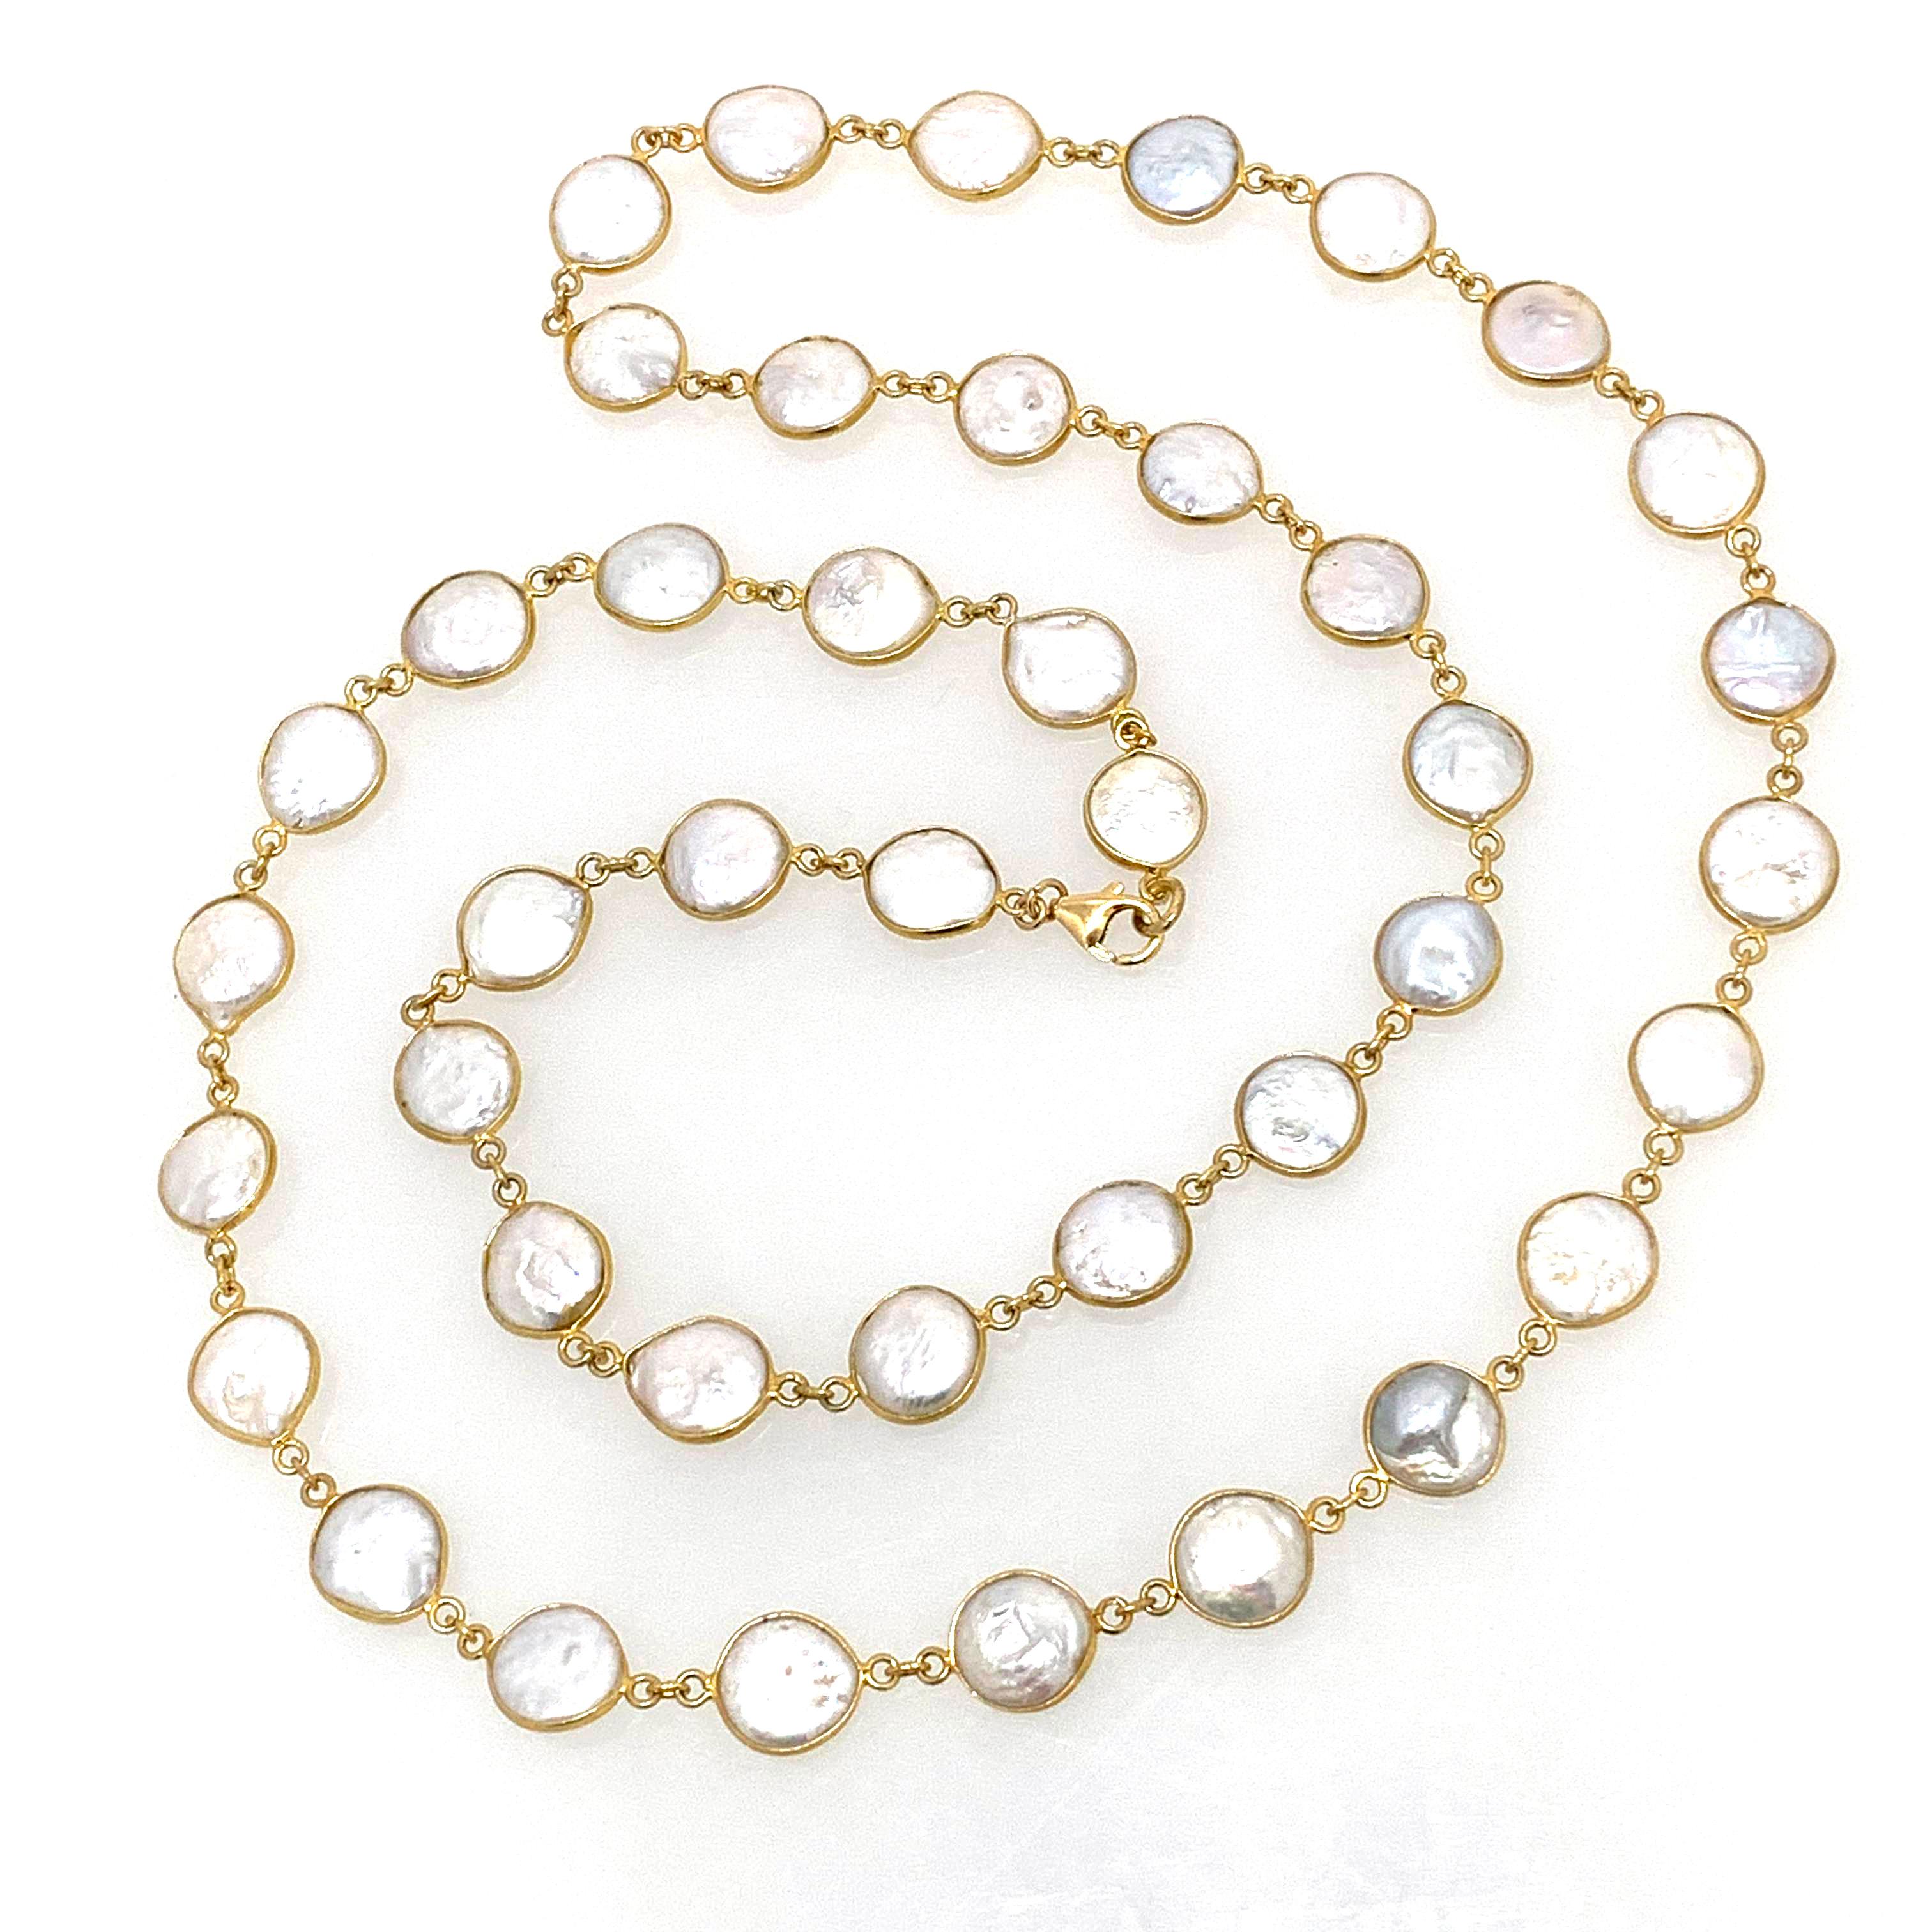 This bezel-set coin pearl long necklace is such a beautiful piece! 

This long and elegant necklace features 42 pcs of unique shape and lustrous genuine cultured coin pearls. Each pearl measures 12-13mm (1/2